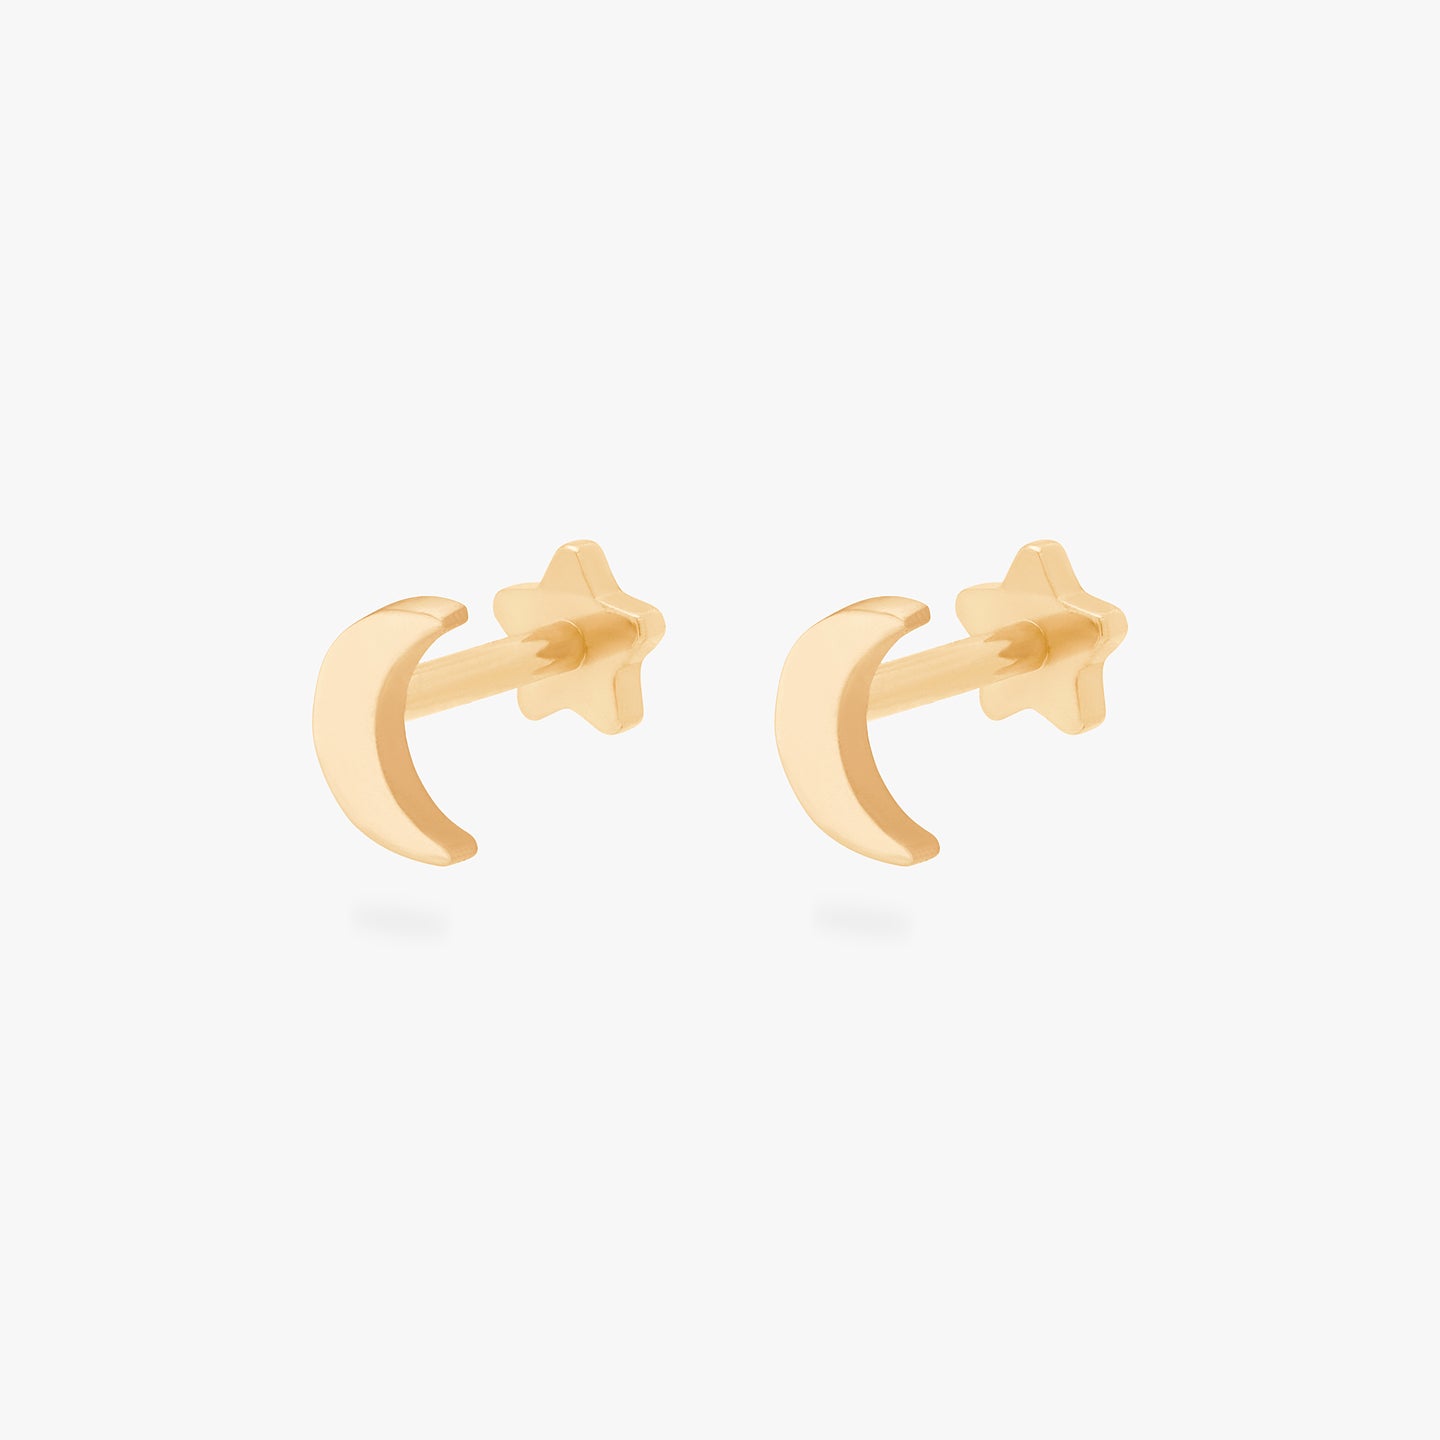 This is an image of a pair of gold moon-shaped flatback tops with gold labrets with star-shaped discs. [pair] color:null|gold